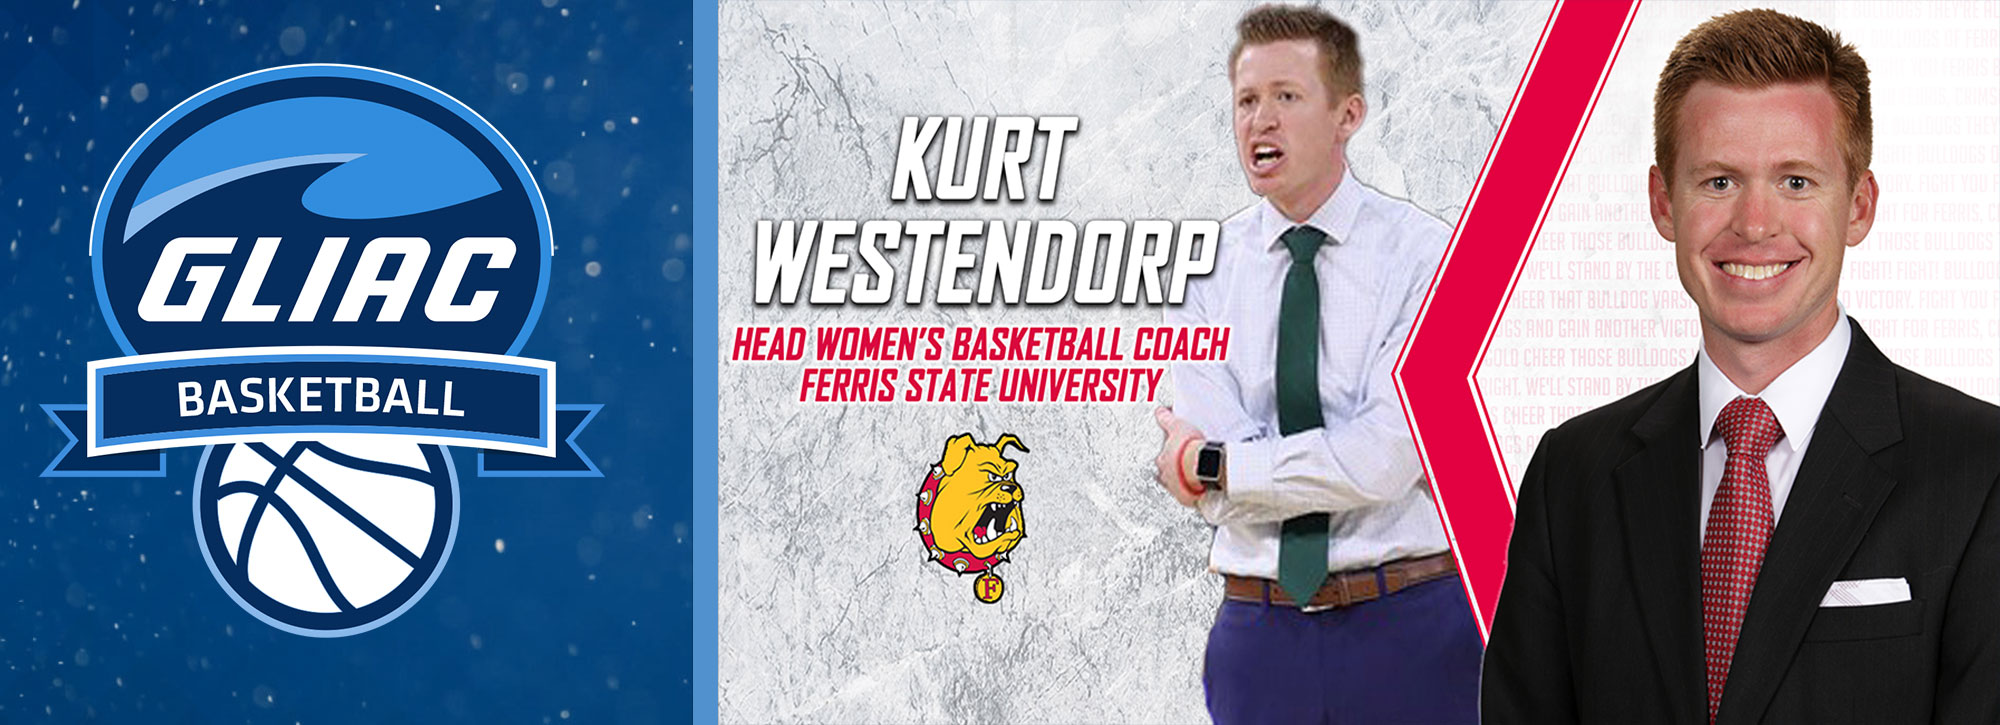 Michigan Native Kurt Westendorp Appointed To Lead Ferris State Women's Basketball